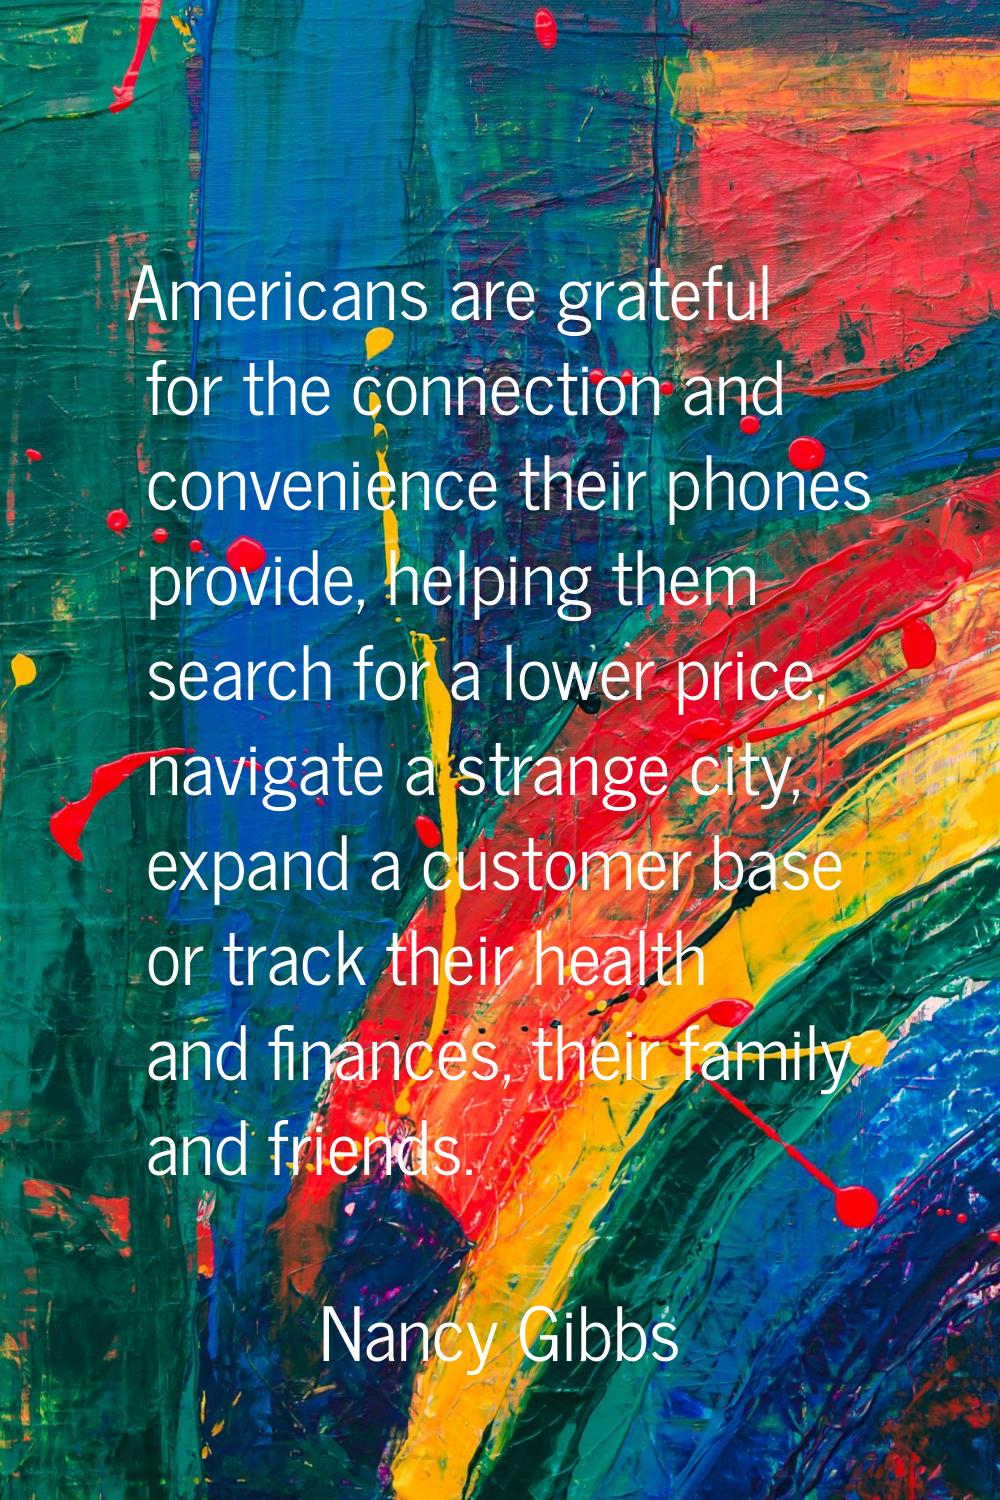 Americans are grateful for the connection and convenience their phones provide, helping them search